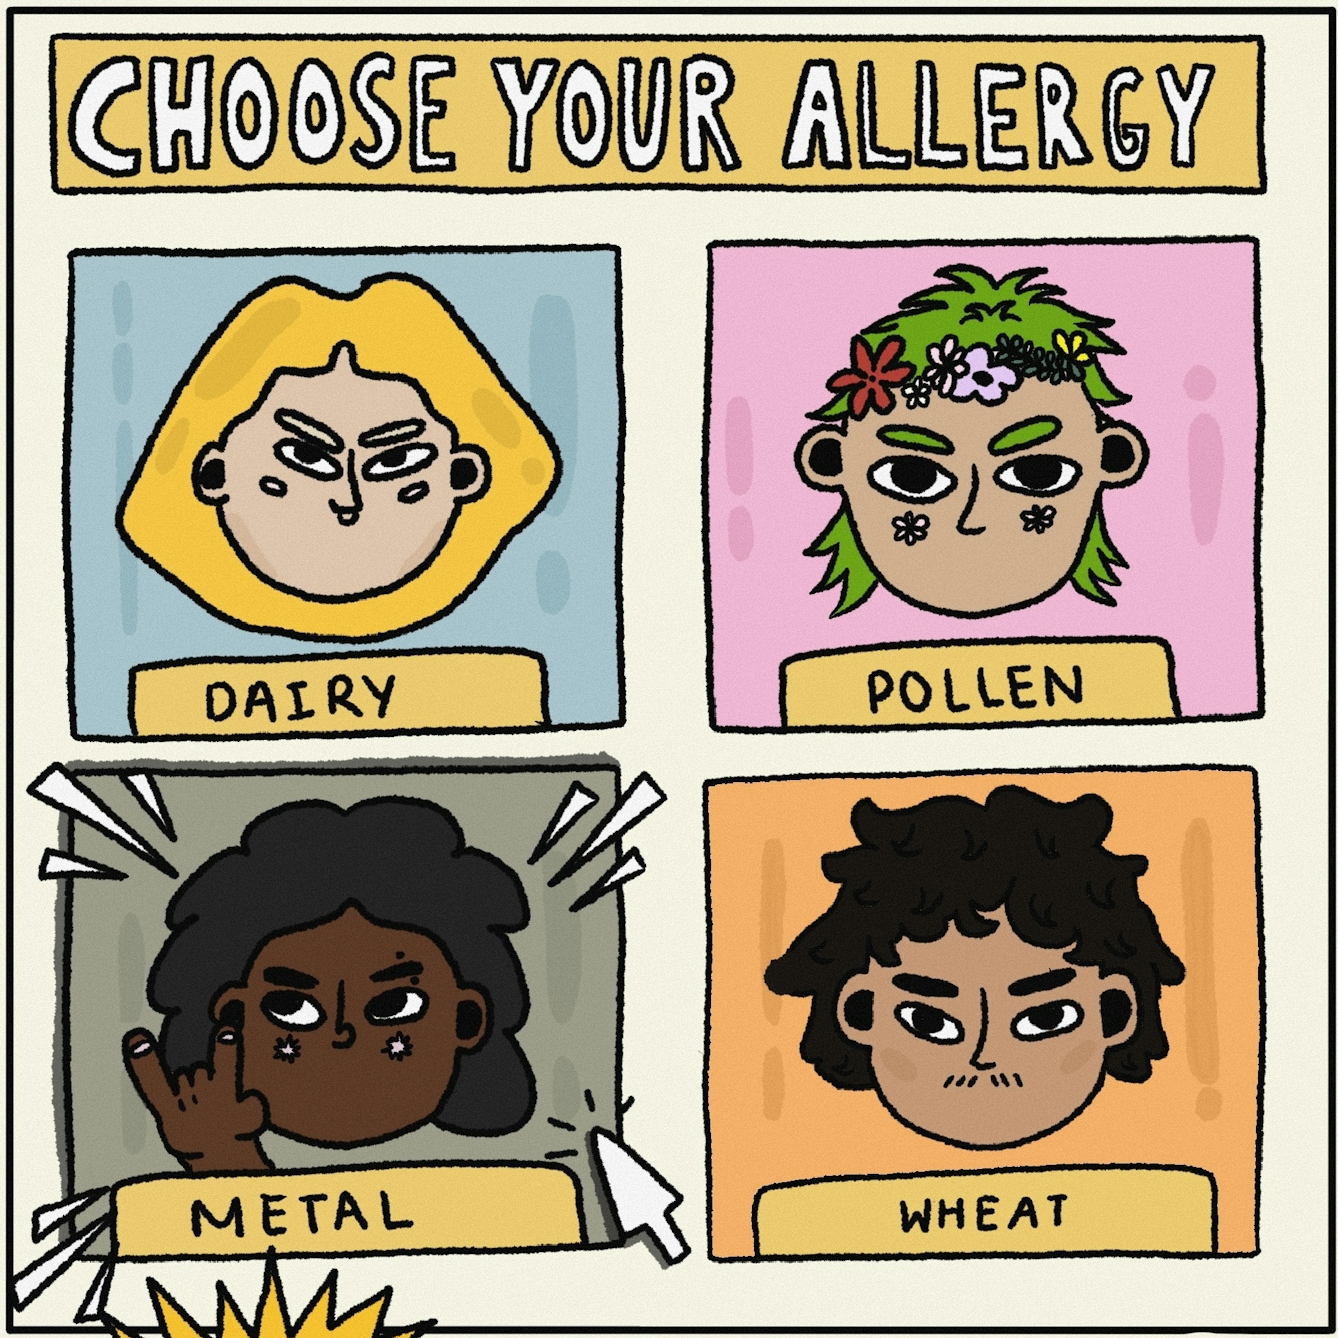 Panel 1 of a digitally drawn, four-panel comic titled ‘Winning’. Text at the top reads “CHOOSE YOUR ALLERGY”. The box in the bottom left is labelled ‘METAL’ and, in it, is a character with dark brown skin and black curly hair doing the ‘rock and roll’ hand sign. A cartoon cursor is clicking over this box to signal this is the allergy you have chosen. There are three other boxes with characters that have not been chosen, labelled ‘DAIRY’, ‘POLLEN’ and ‘WHEAT’.